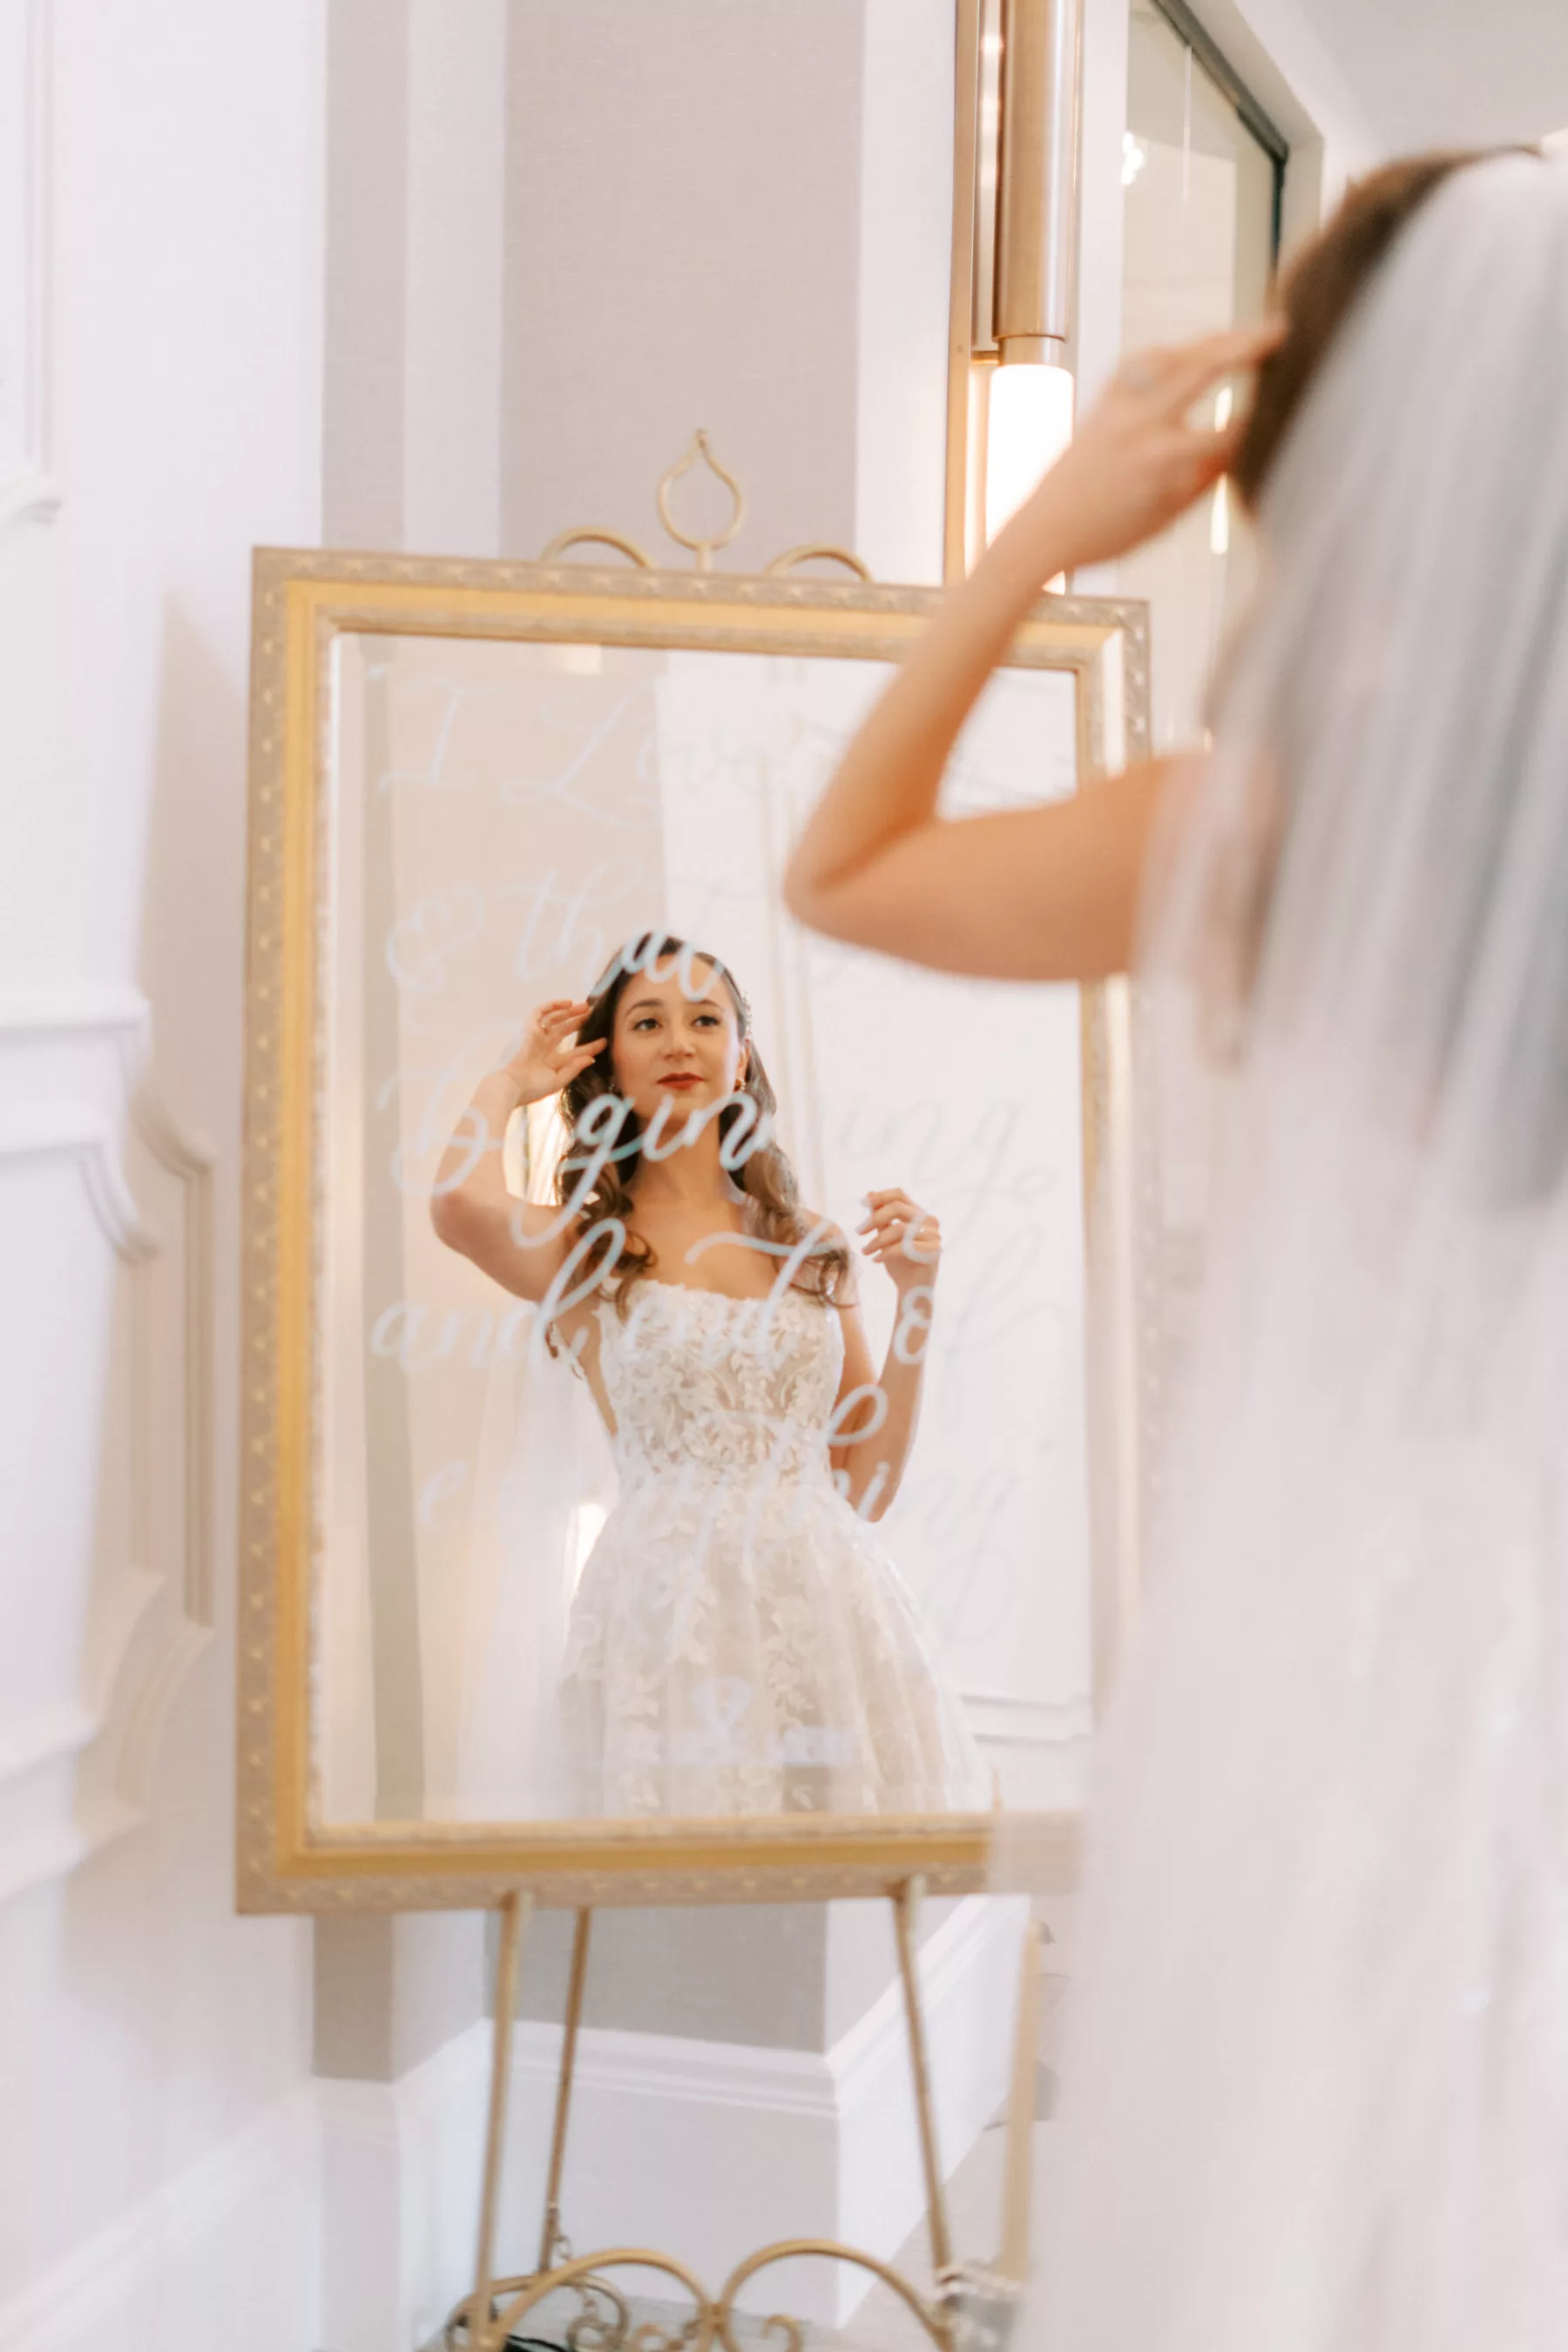 Bride Getting Ready Wedding Portrait | Great Gatsby Inspired Hair and Makeup Ideas | Tampa Bay Hair and Makeup Artist Michele Renee the Studio | Photographer Eddy Almaguer Photography